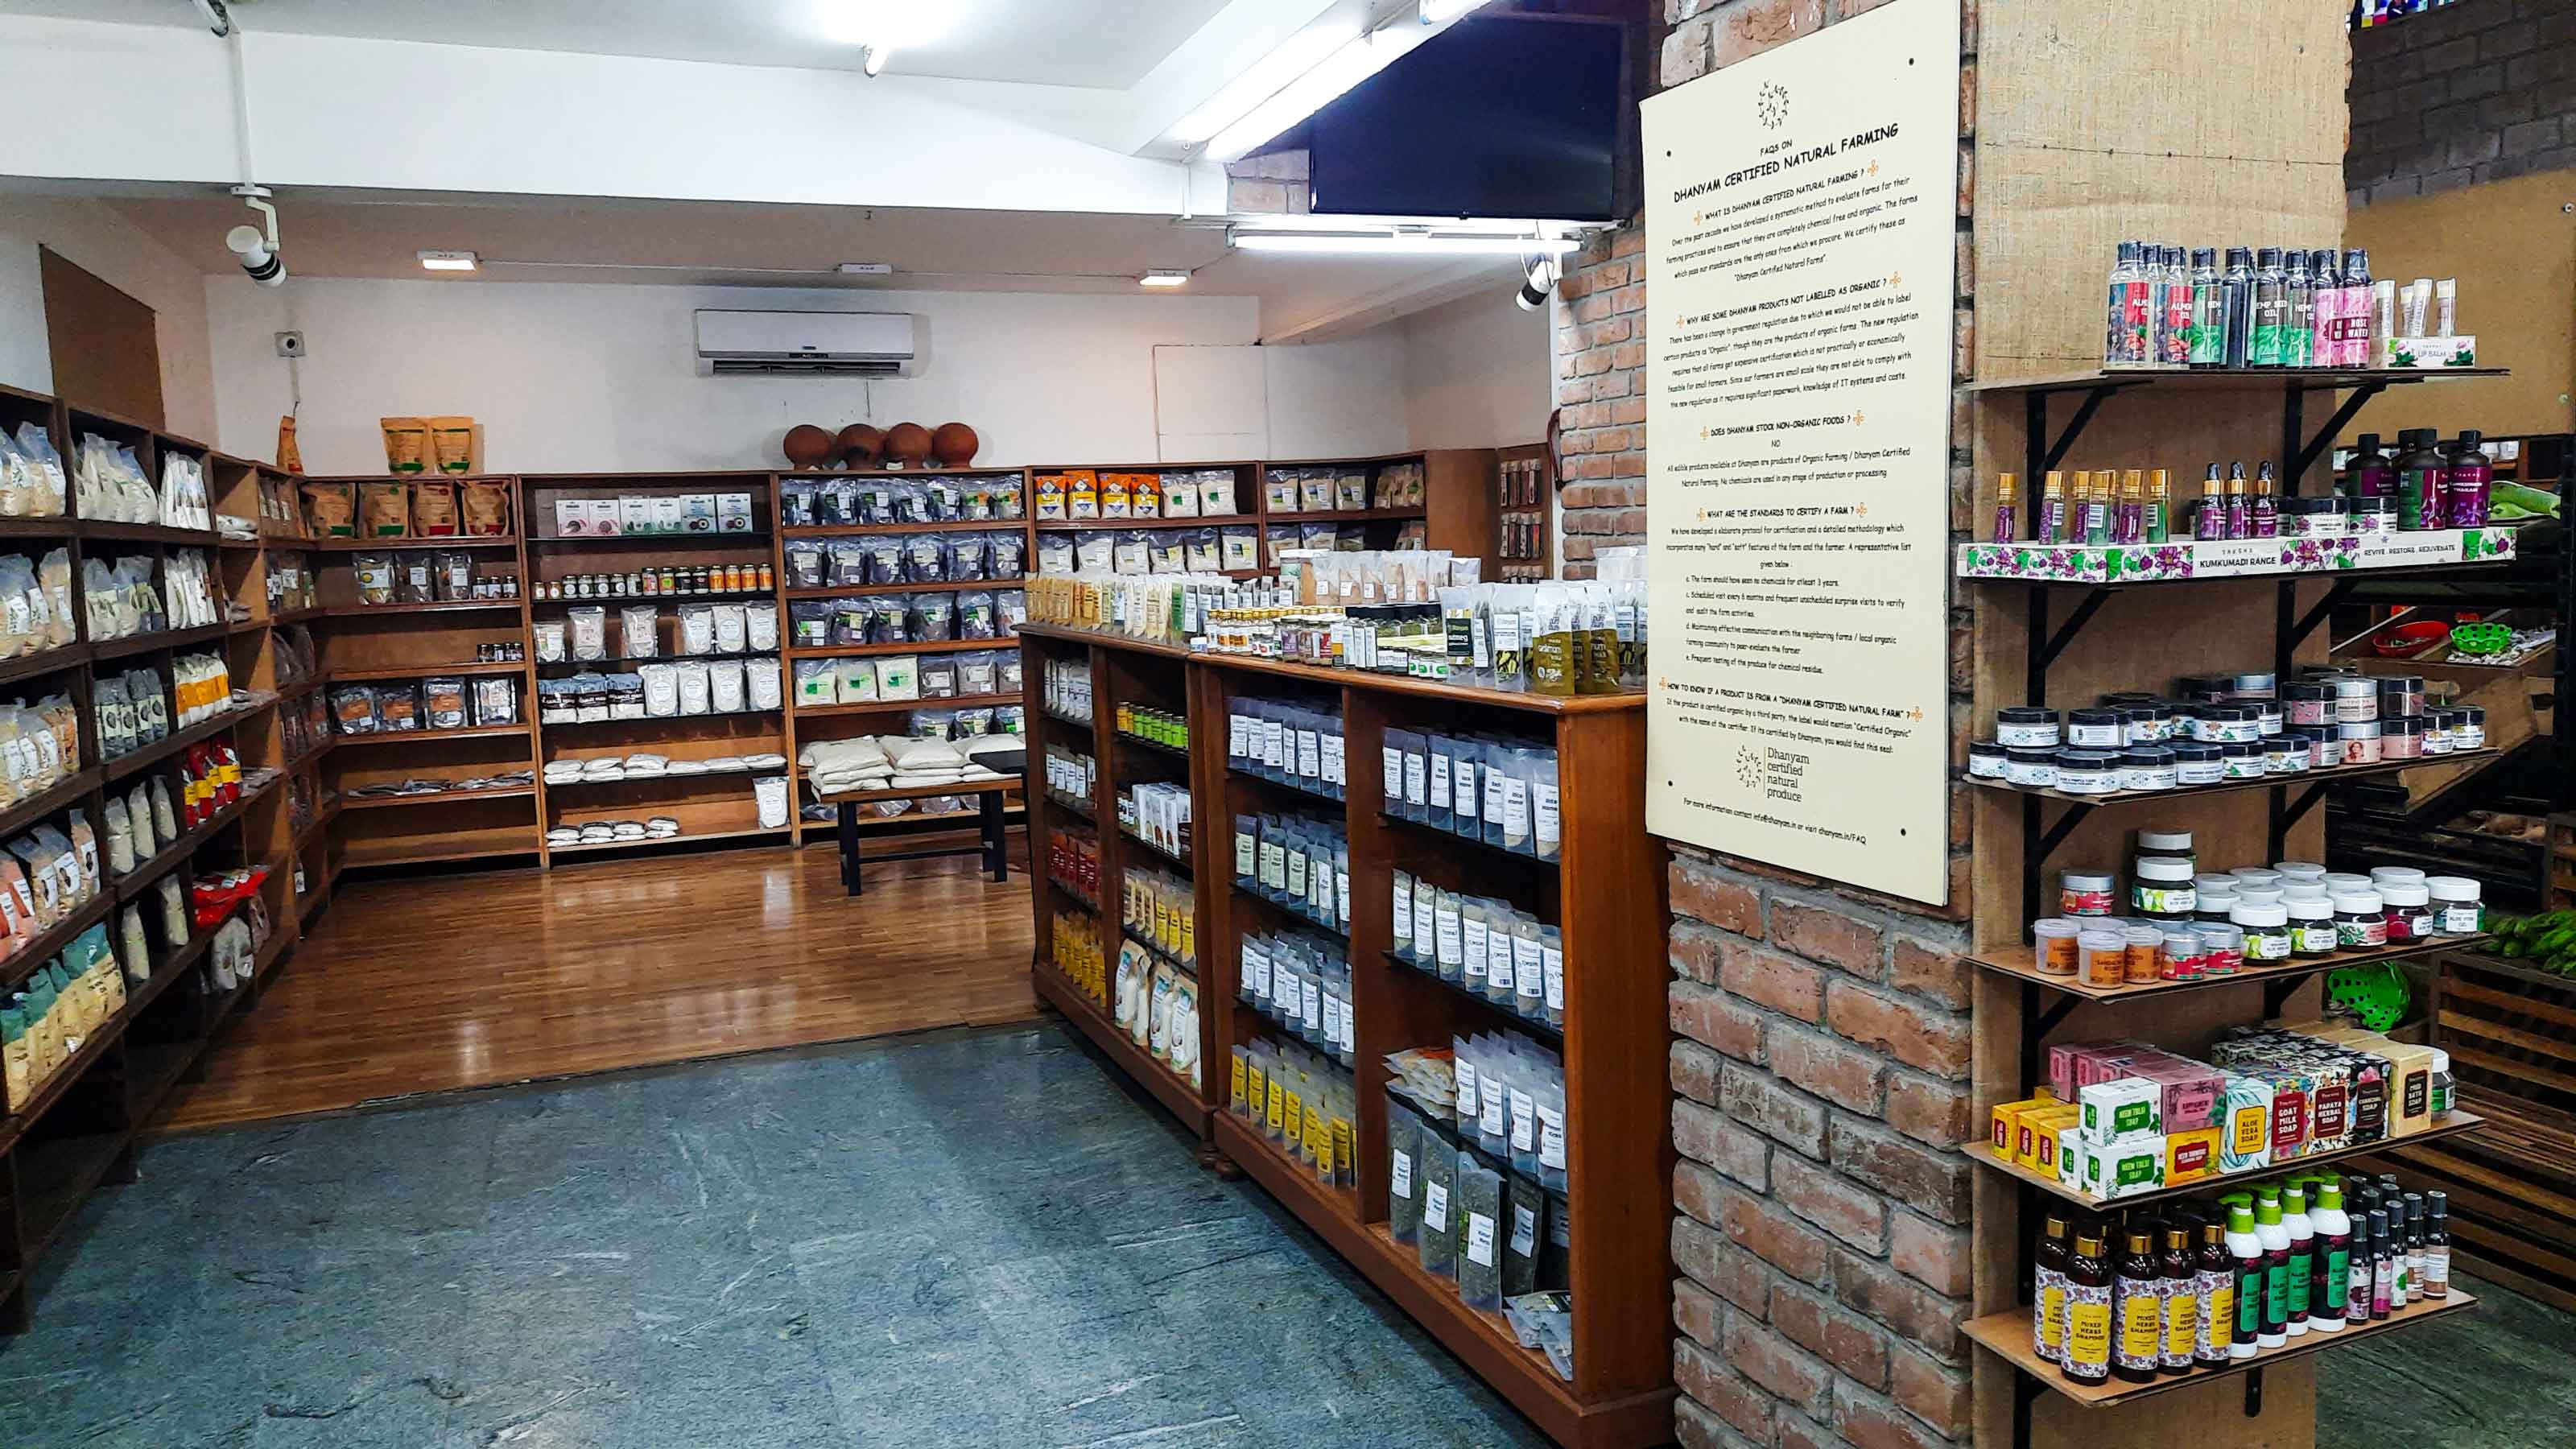 Inside store pic- Products on display